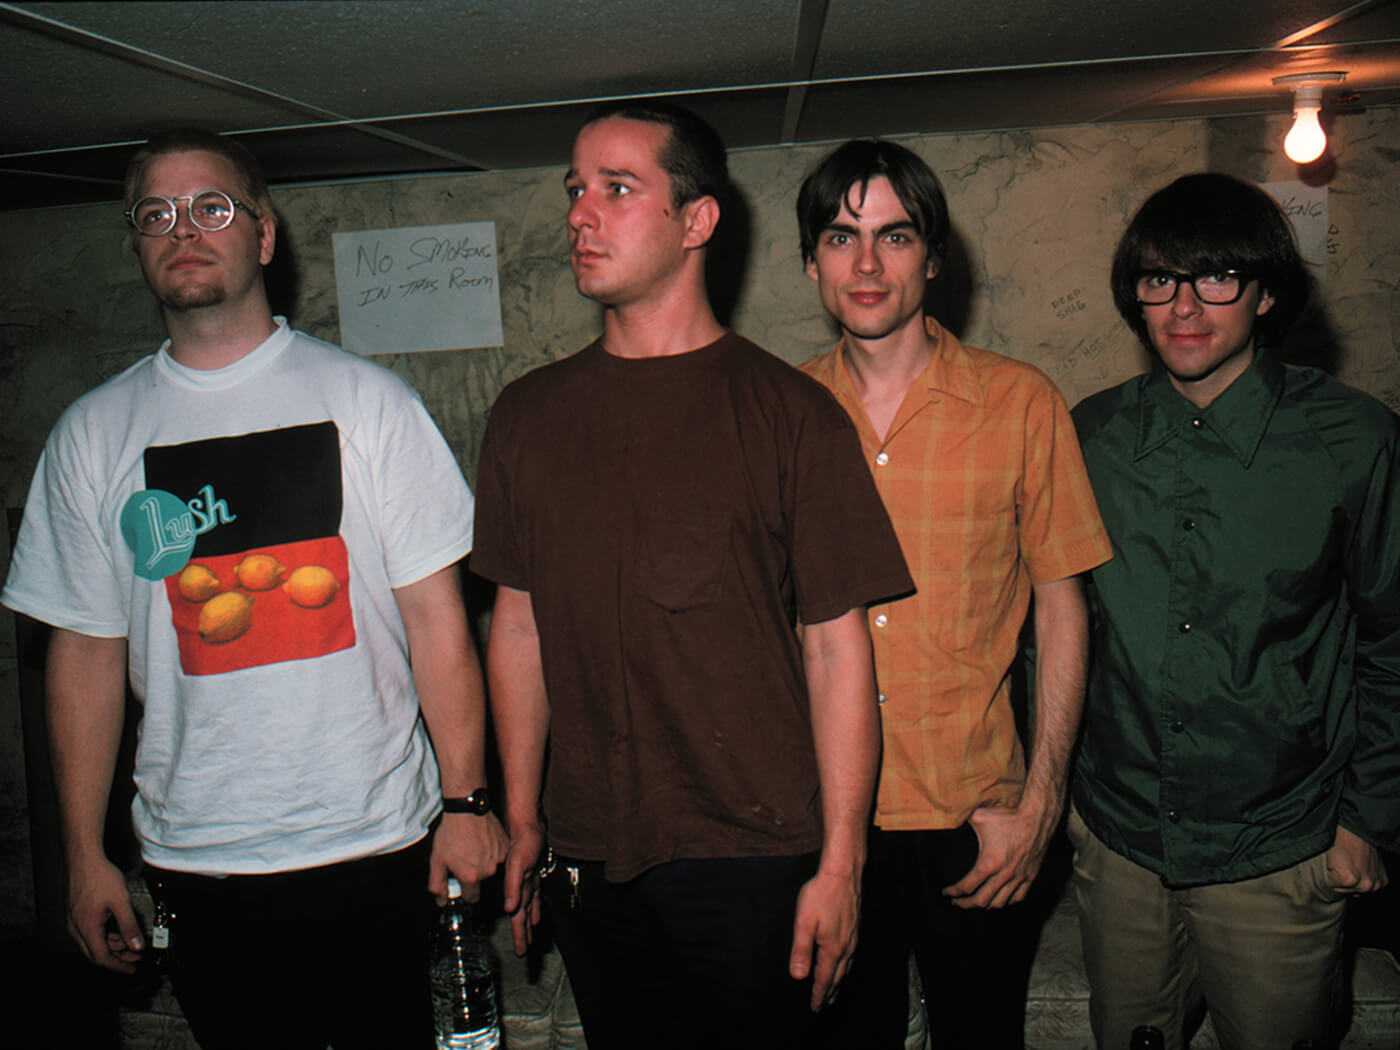 Patrick Wilson, Matt Sharp, Brian Bell and Rivers Cuomo of Weezer photographed in 1994, photo by Jim Steinfeldt/Michael Ochs Archives via Getty Images